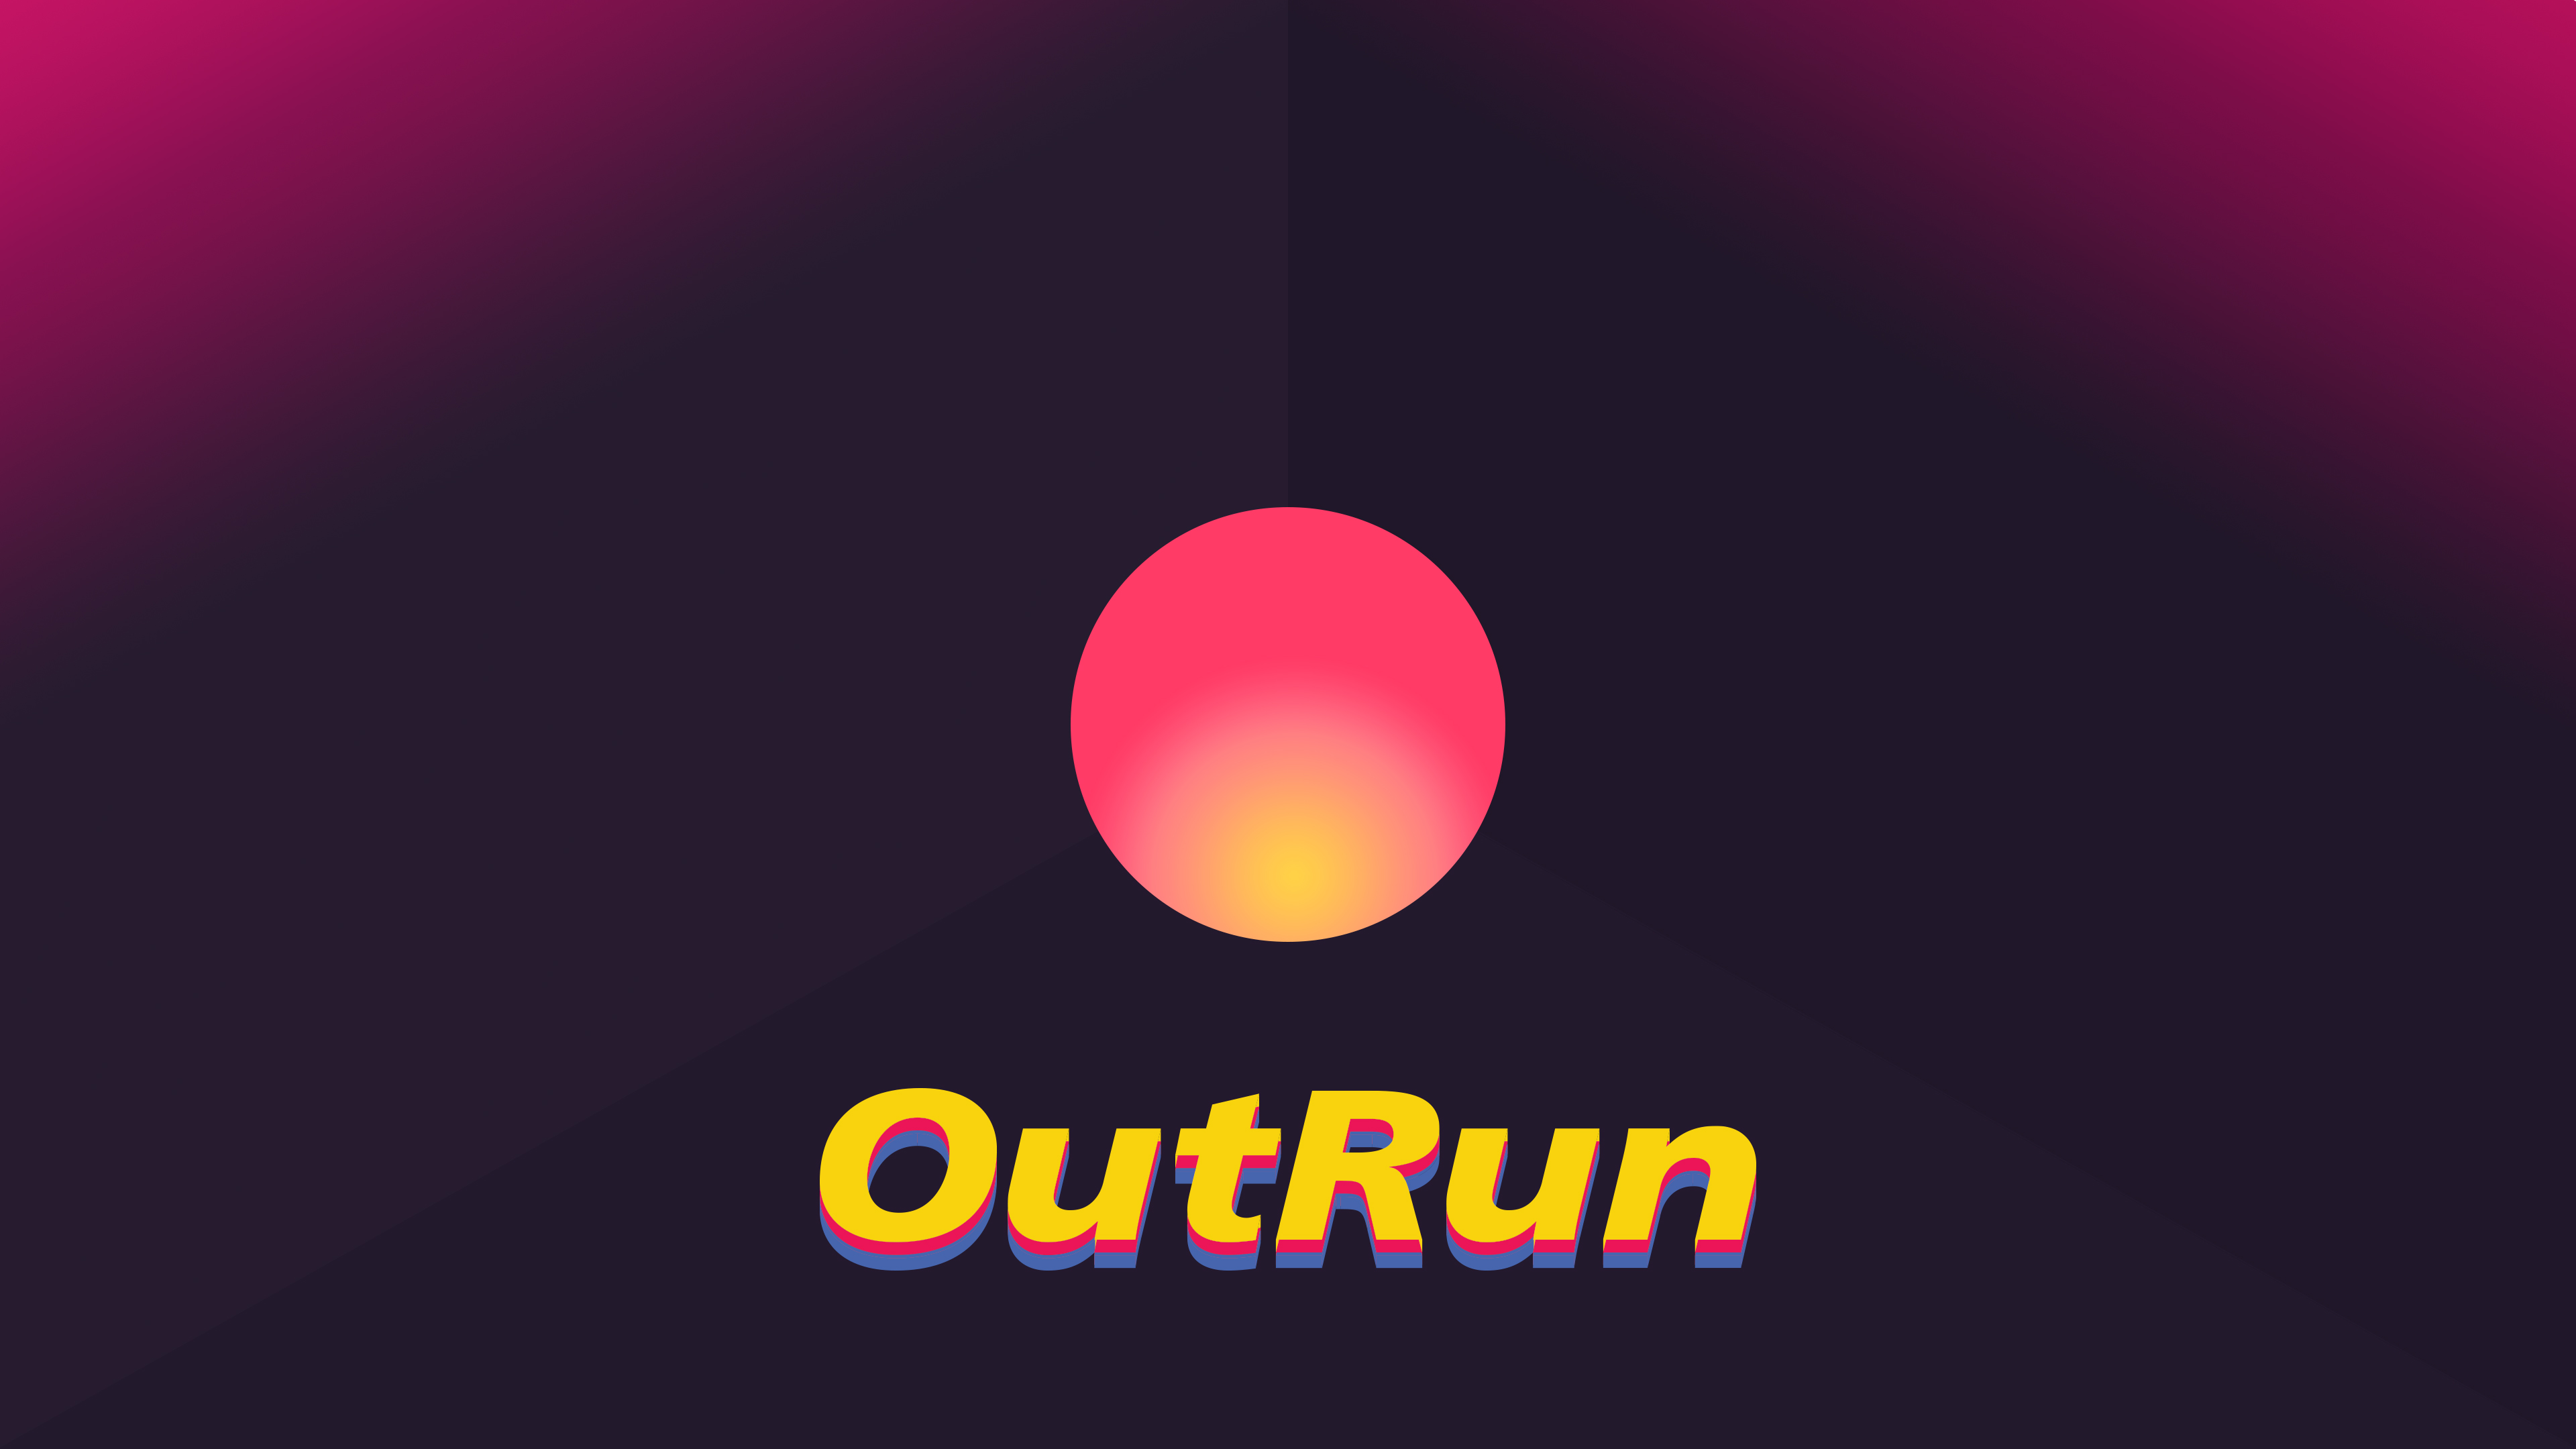 General 3840x2160 OutRun minimalism gradient typography